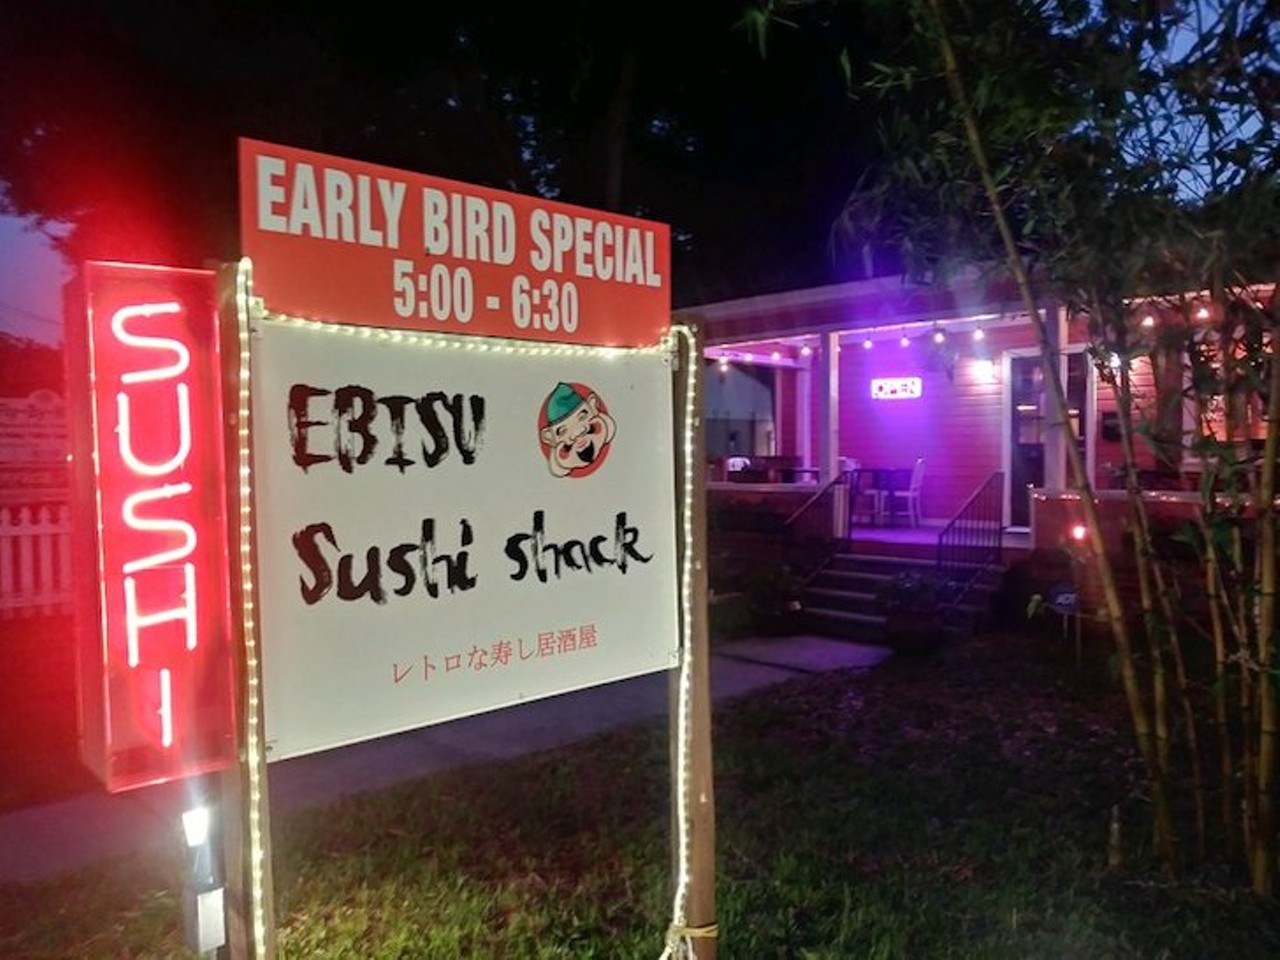 Ebisu Sushi Shack
5116 N. Nebraska Ave., Tampa, 813-252-6393
This tiny house is serving up some of the best sushi in Seminole Heights. Super low key, with extra large bottles of Kirin. Cute date night spot for low maintenance partners who enjoy A1 rolls.
Photo via Ebisu Sushi Shack/Facebook